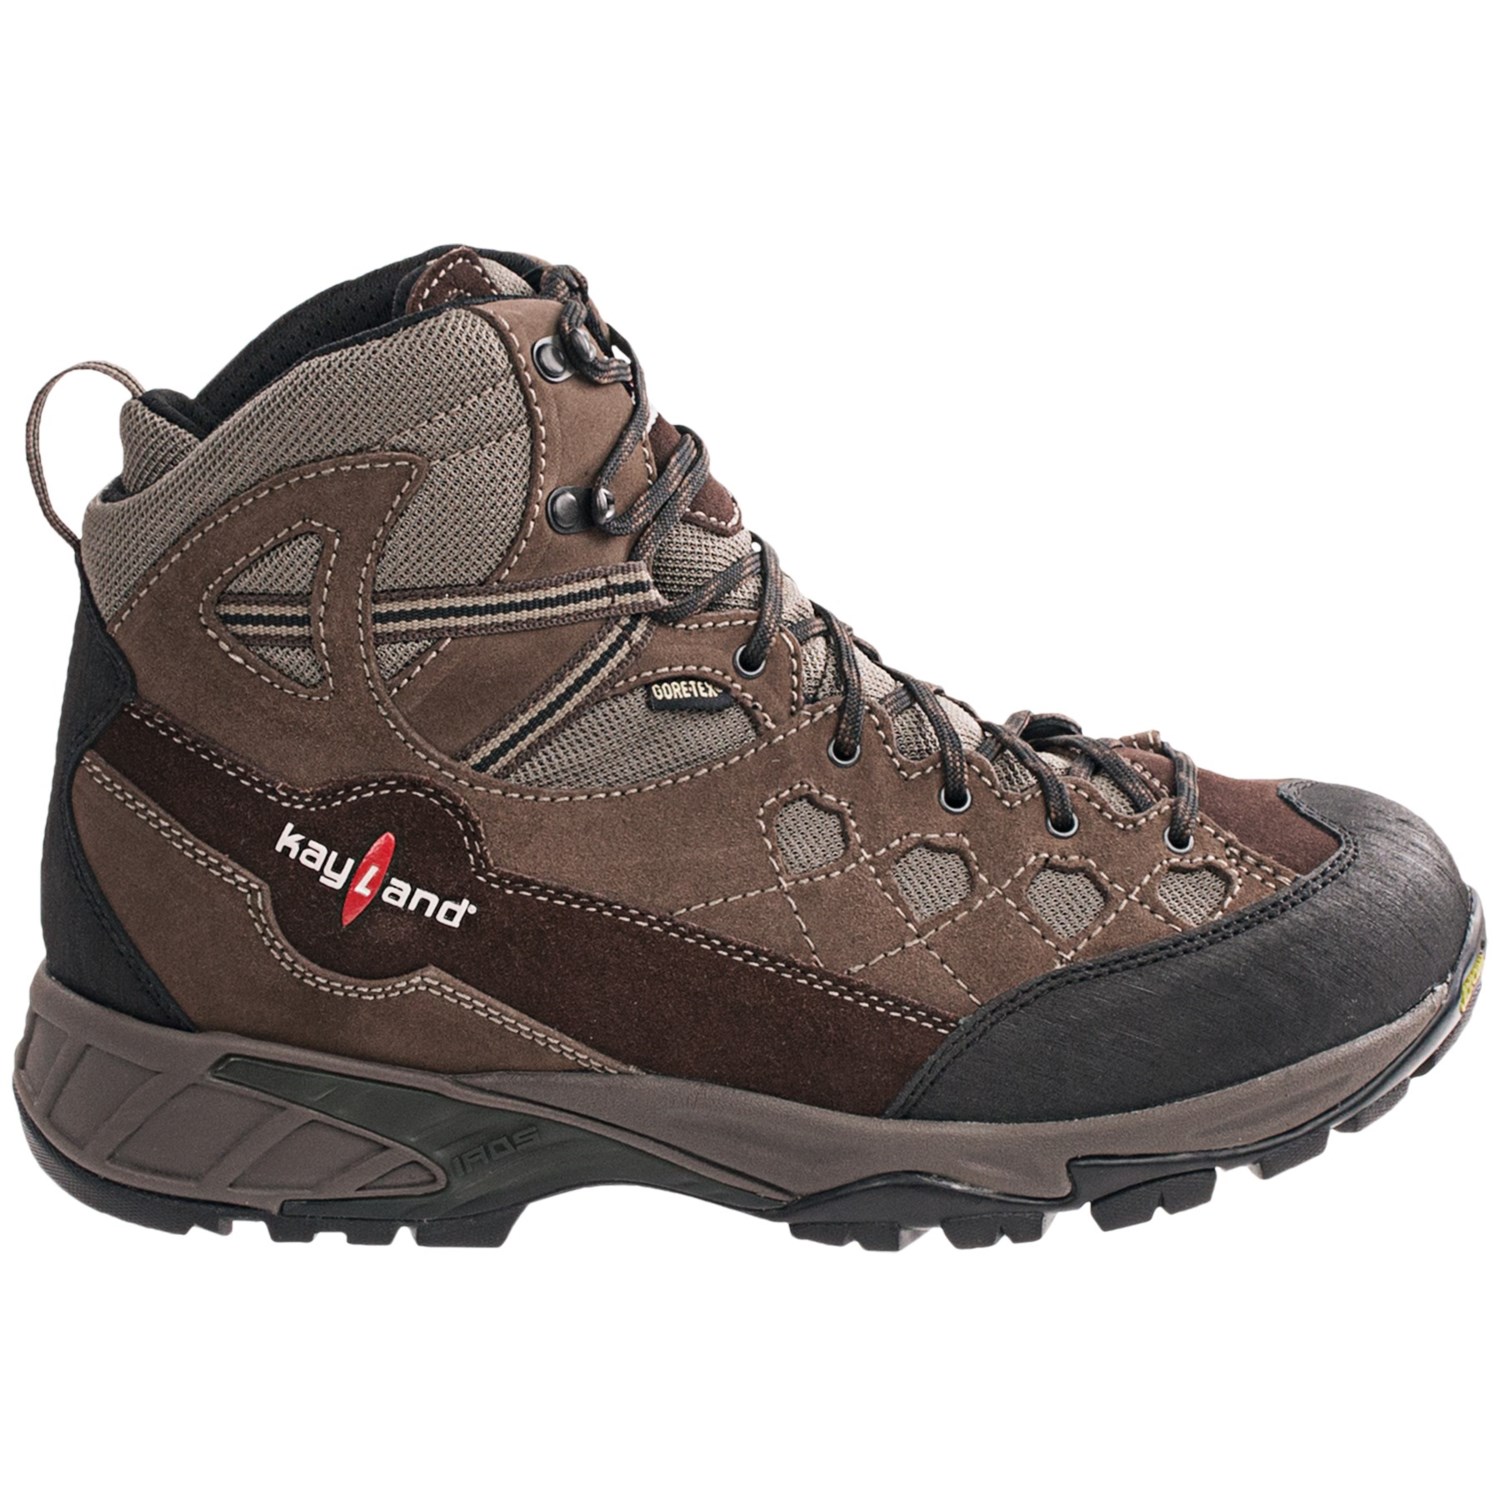 Kayland Explore Gore-Tex® Hiking Boots (For Men) 7327K - Save 47%